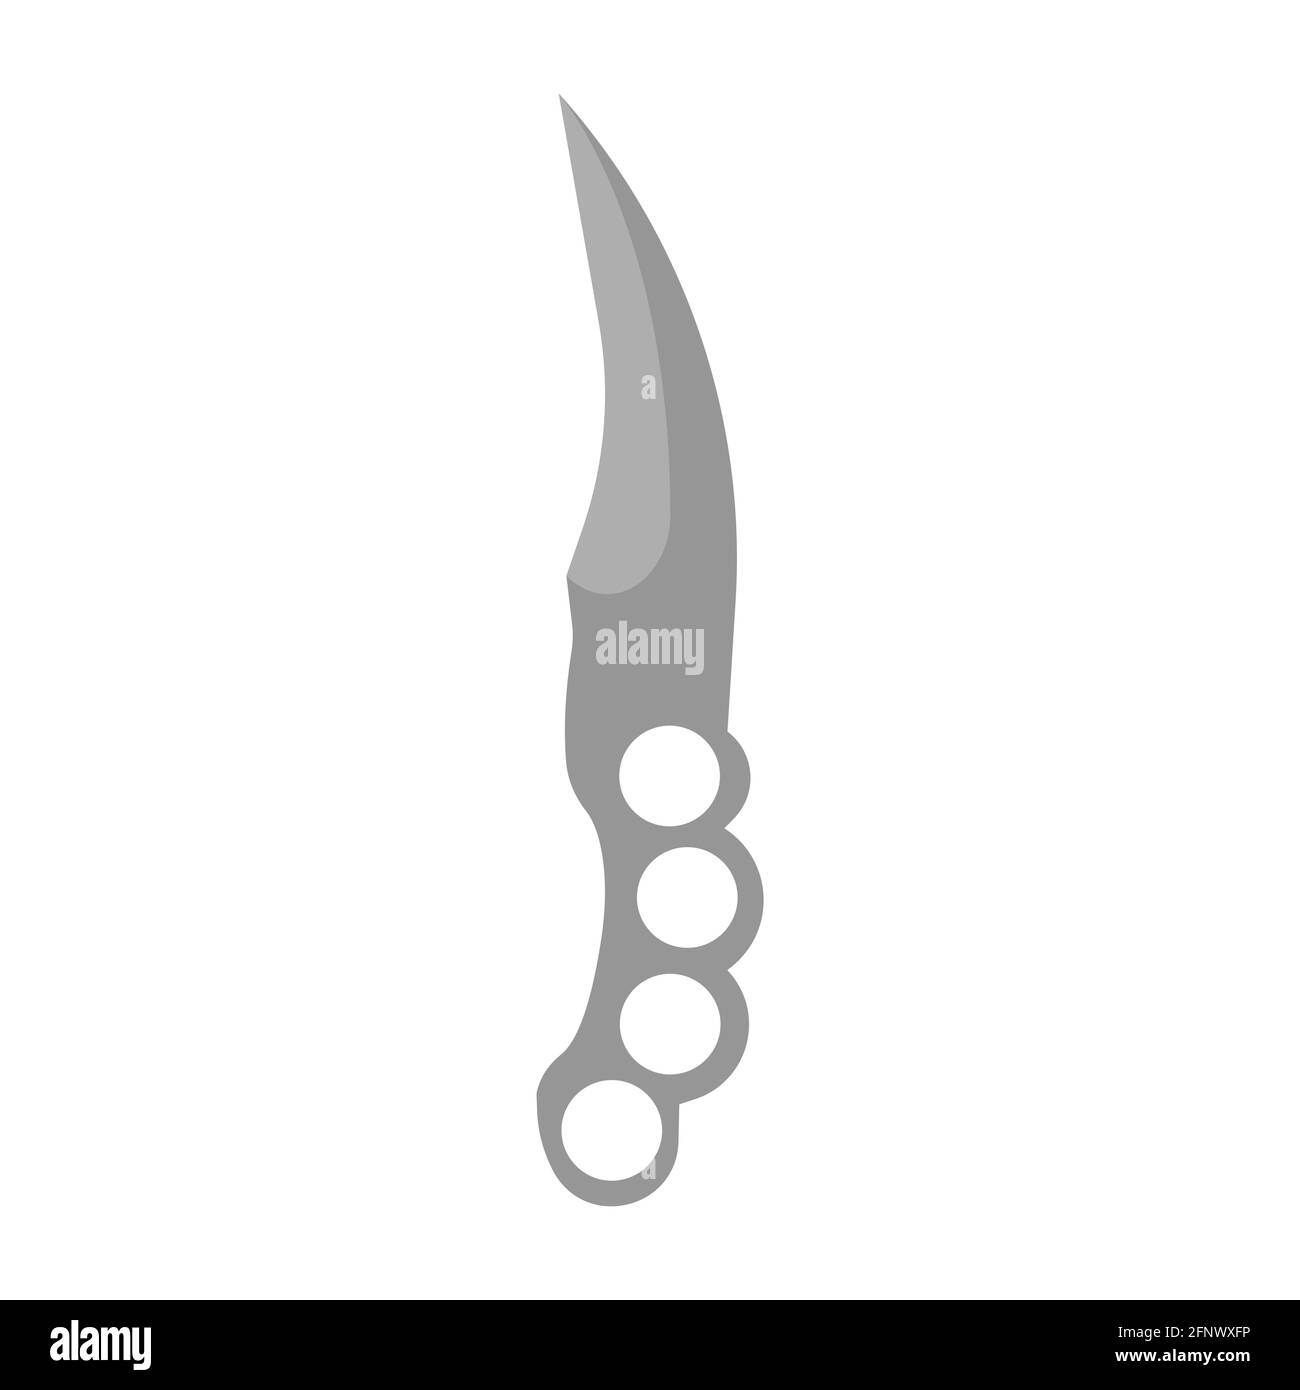 https://c8.alamy.com/comp/2FNWXFP/weapon-military-knife-vector-illustration-crime-blade-isolated-military-dagger-sharp-steel-symbol-black-weapon-knife-army-handle-tool-silhouette-mur-2FNWXFP.jpg